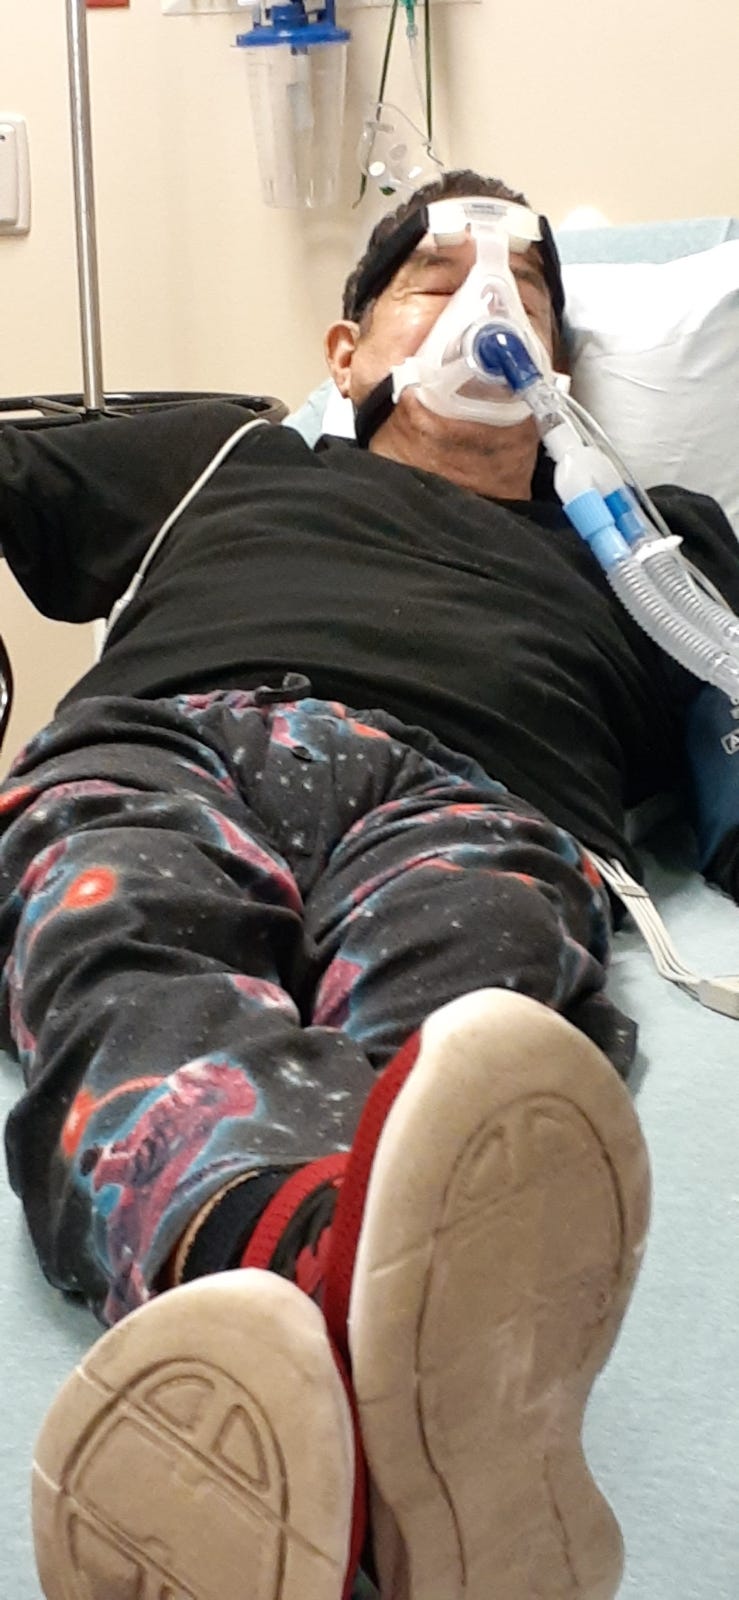 Juan Arizpe lies in a hospital as he is being treated after contracting COVID-19. His daughter could see him for a few minutes. It would be the last time she would see him in person. Arizpe would die three days later of the disease.